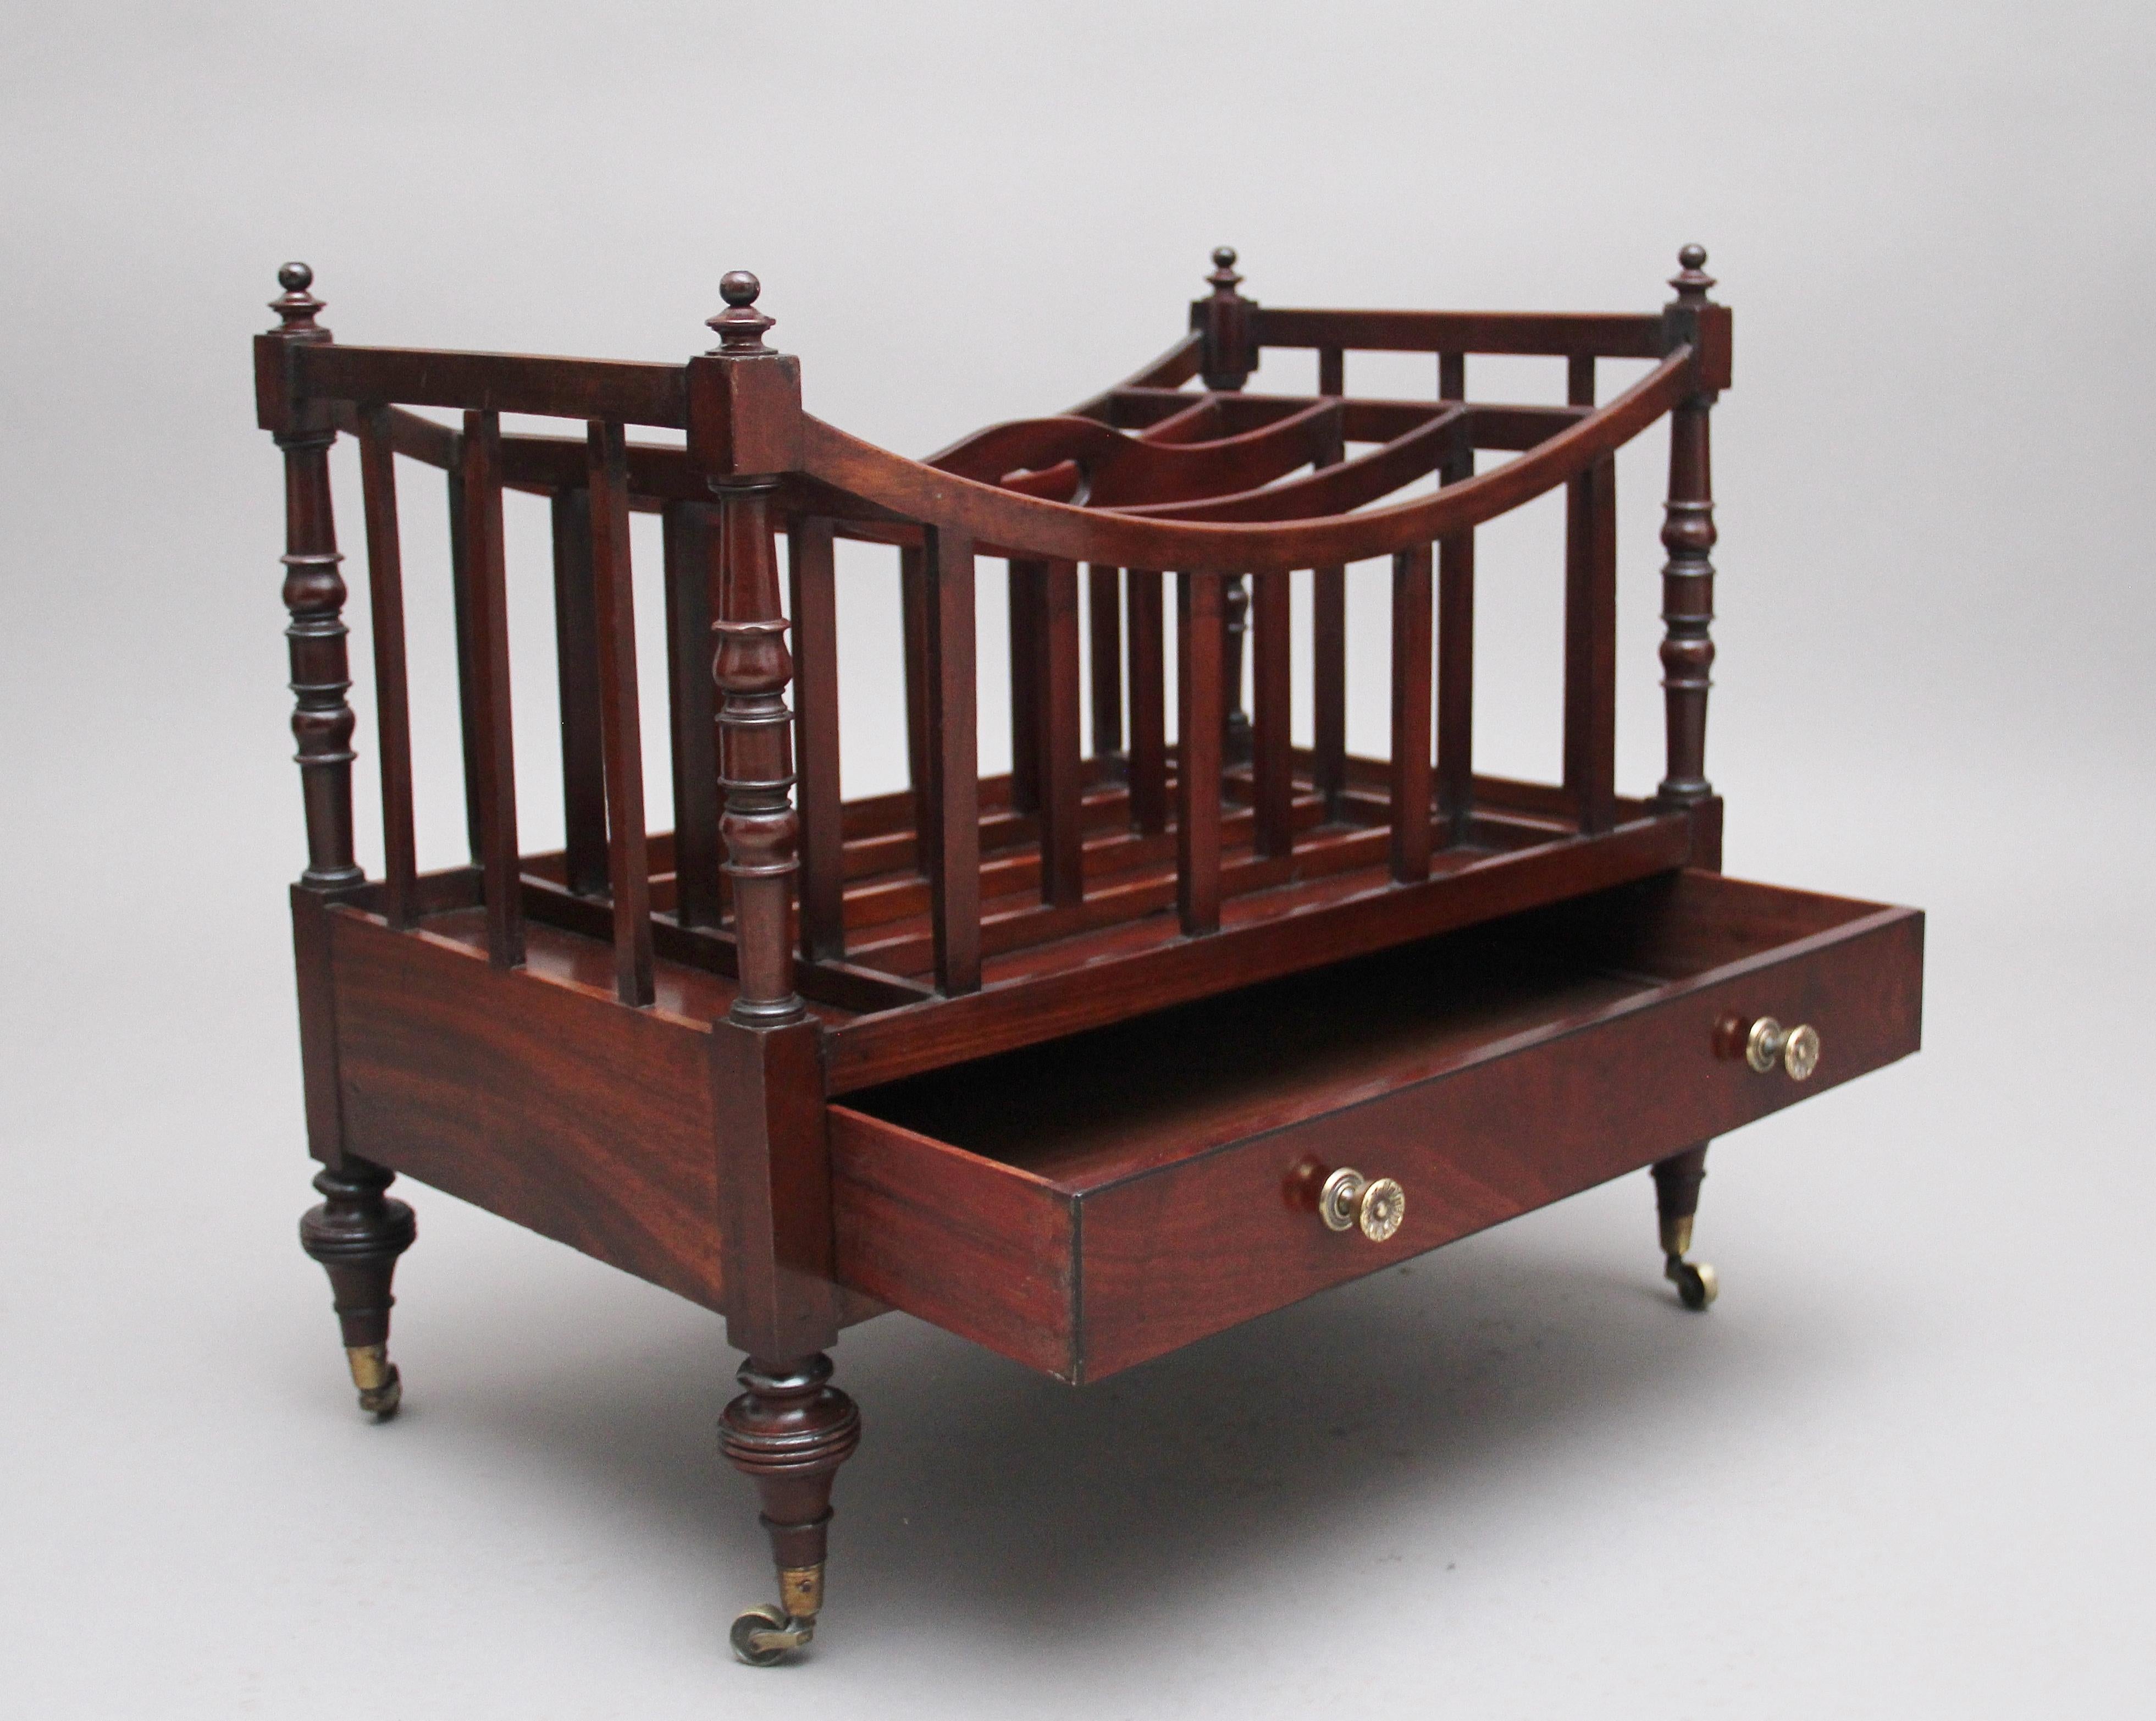 Early 19th century mahogany canterbury, the curved top having turned columns in each corner finished with turned finials, inside having three dividers, having a mahogany lined frieze drawer below with original brass turned knobs, supported on turned